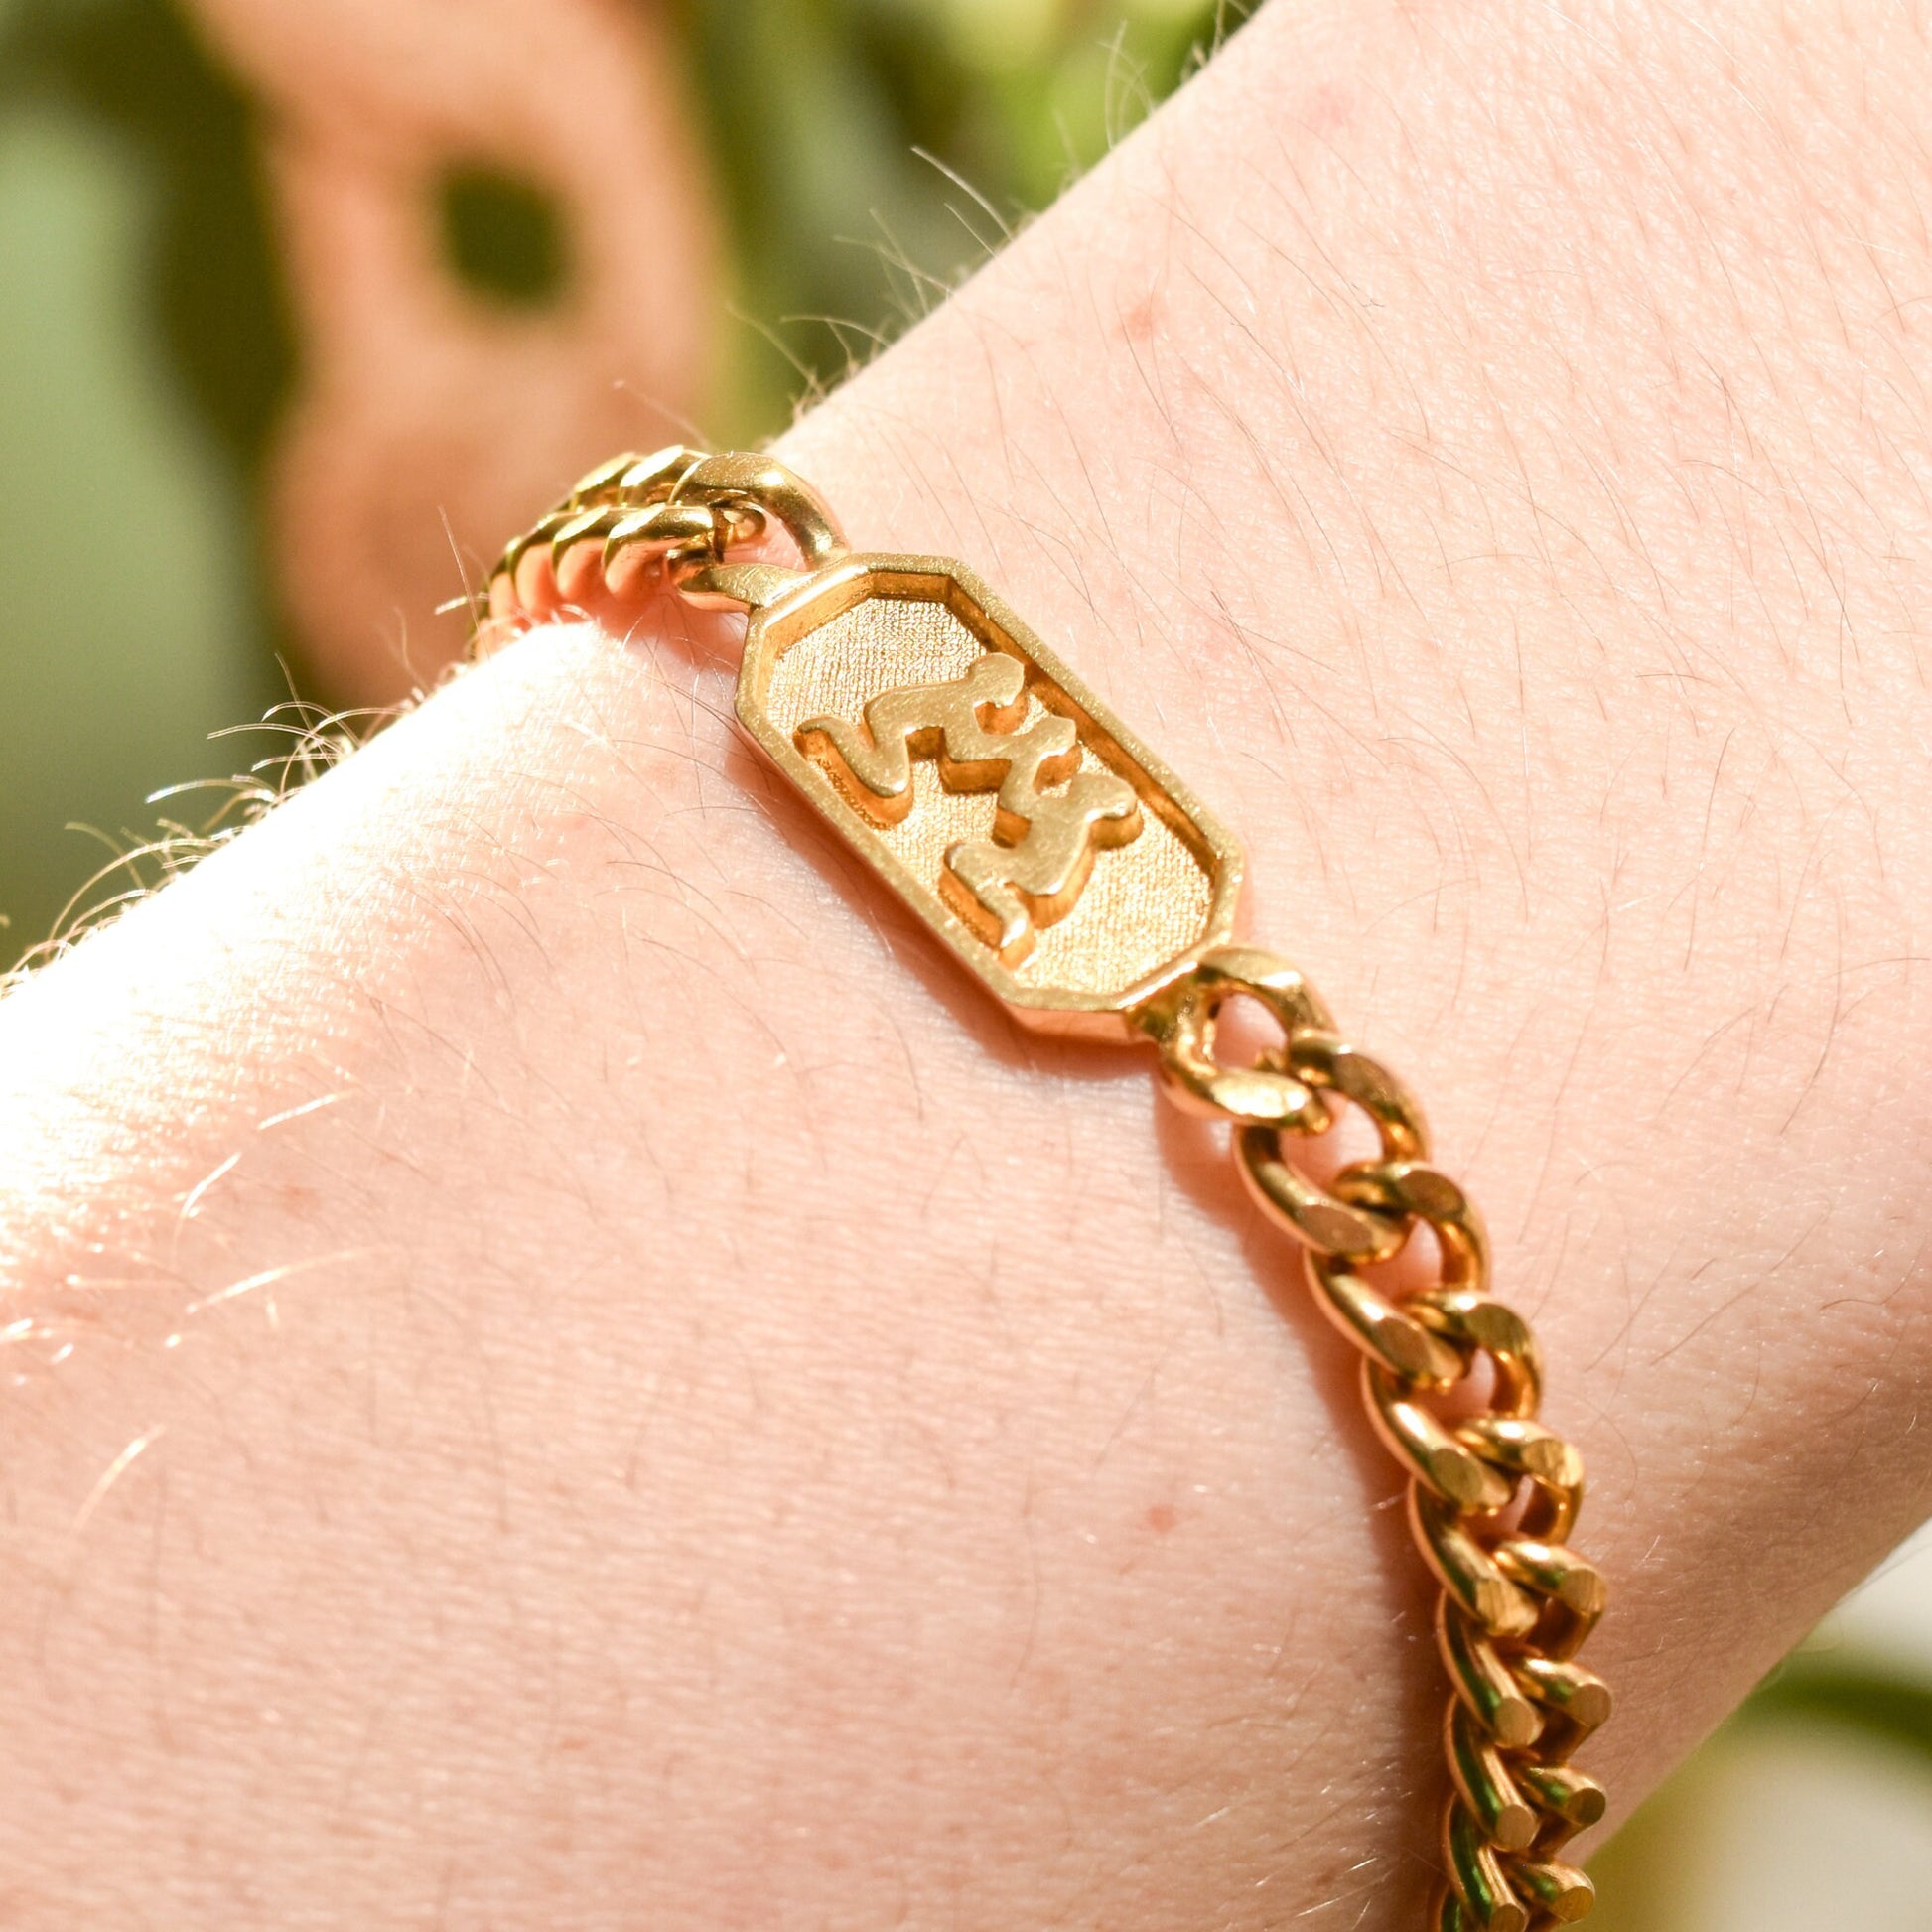 Gold-tone Vintage Trifari Gemini zodiac sign bracelet with 5mm curb link chain on a wrist, highlighting astrology-themed jewelry at 7 inches long.